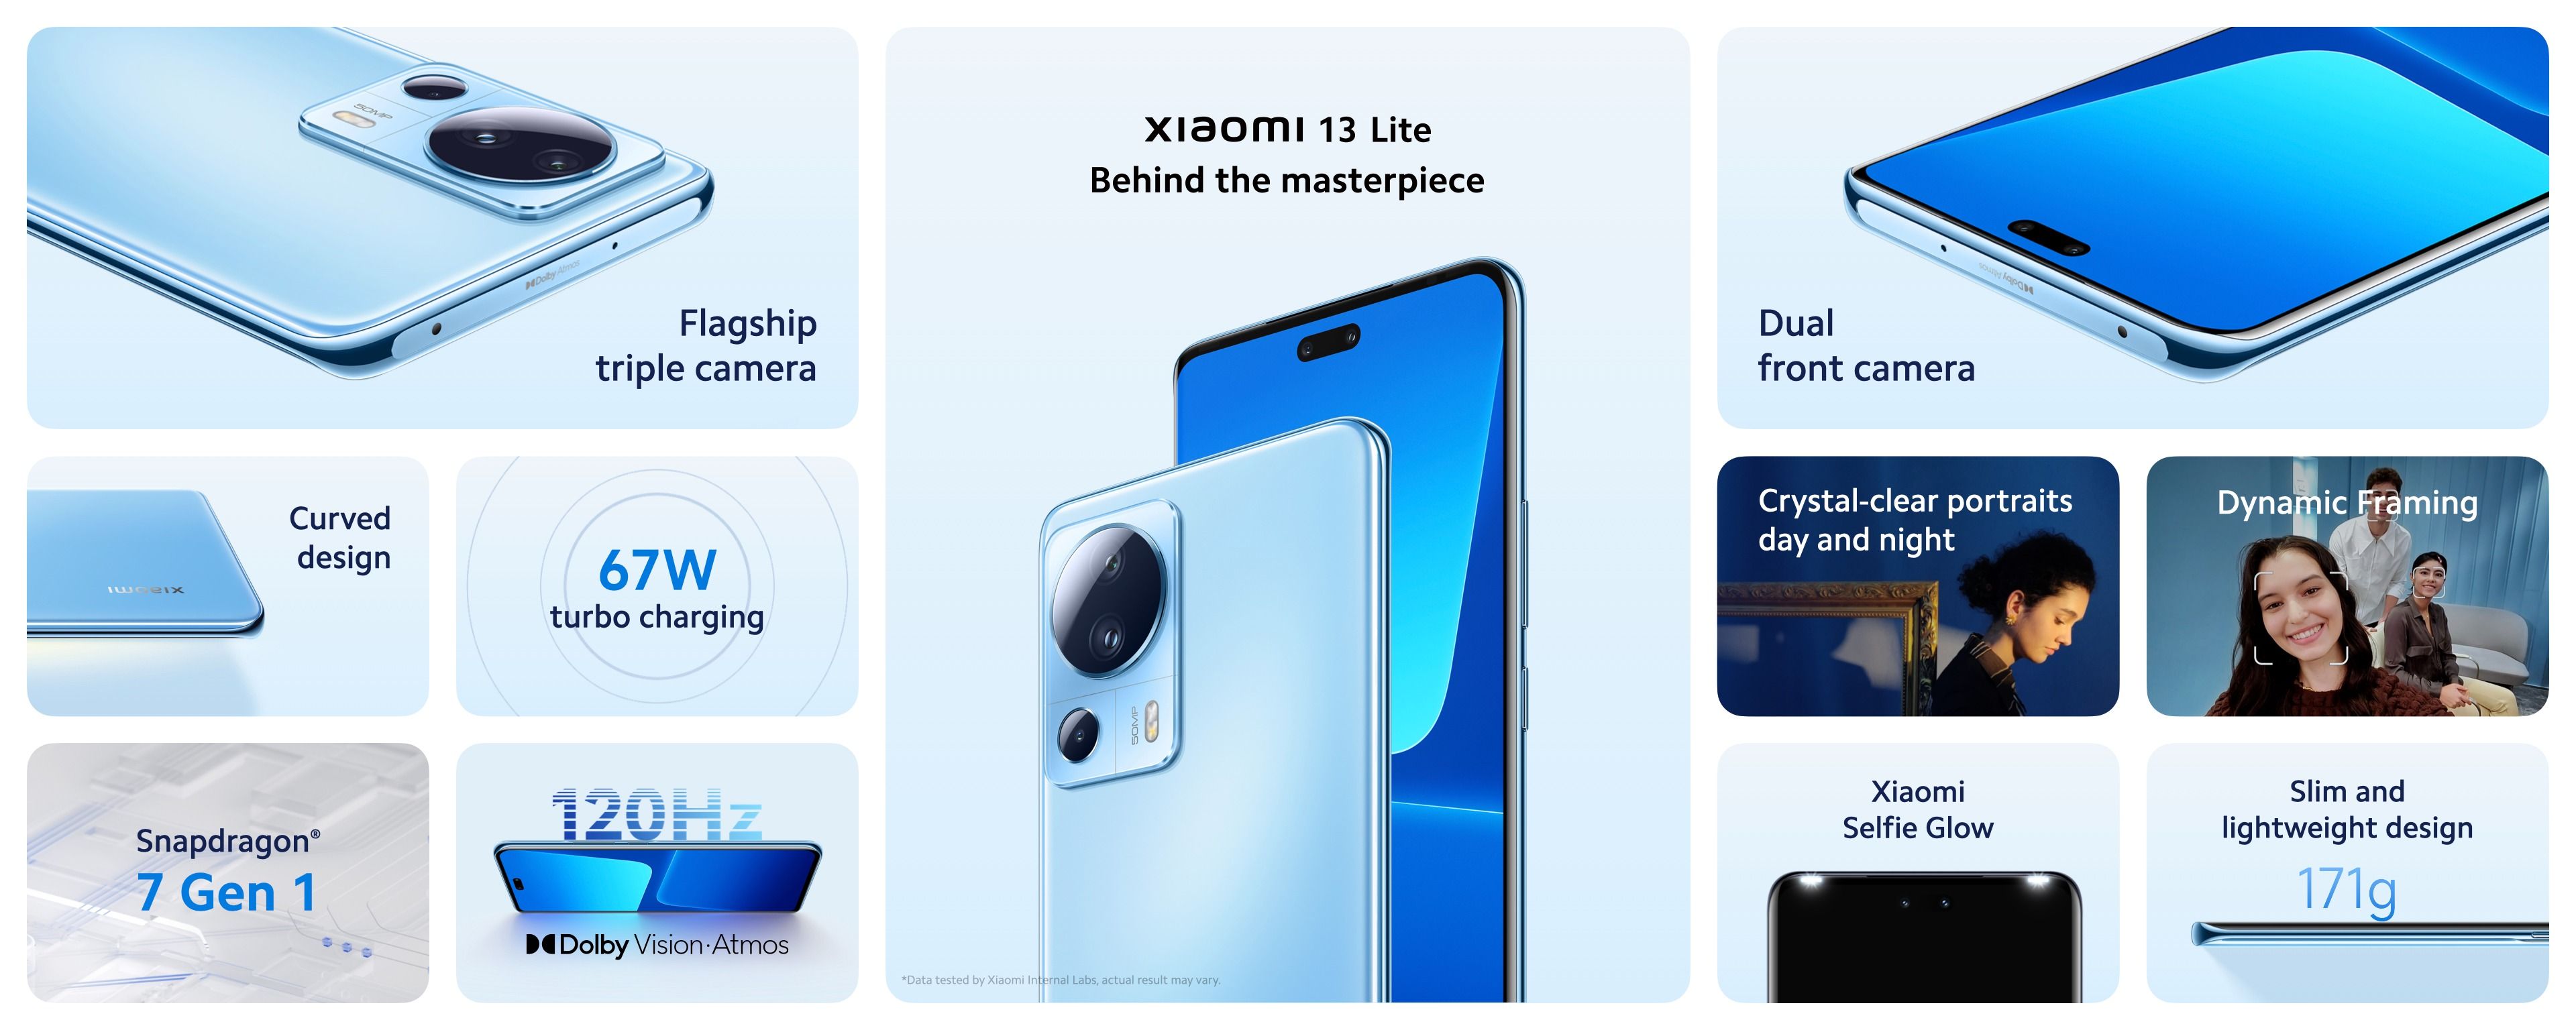 Xiaomi 13 with Snapdragon 8 Gen 2 And Xiaomi 13 Lite with Snapdragon 7 Gen  1 Launched: Price, Specifications - MySmartPrice